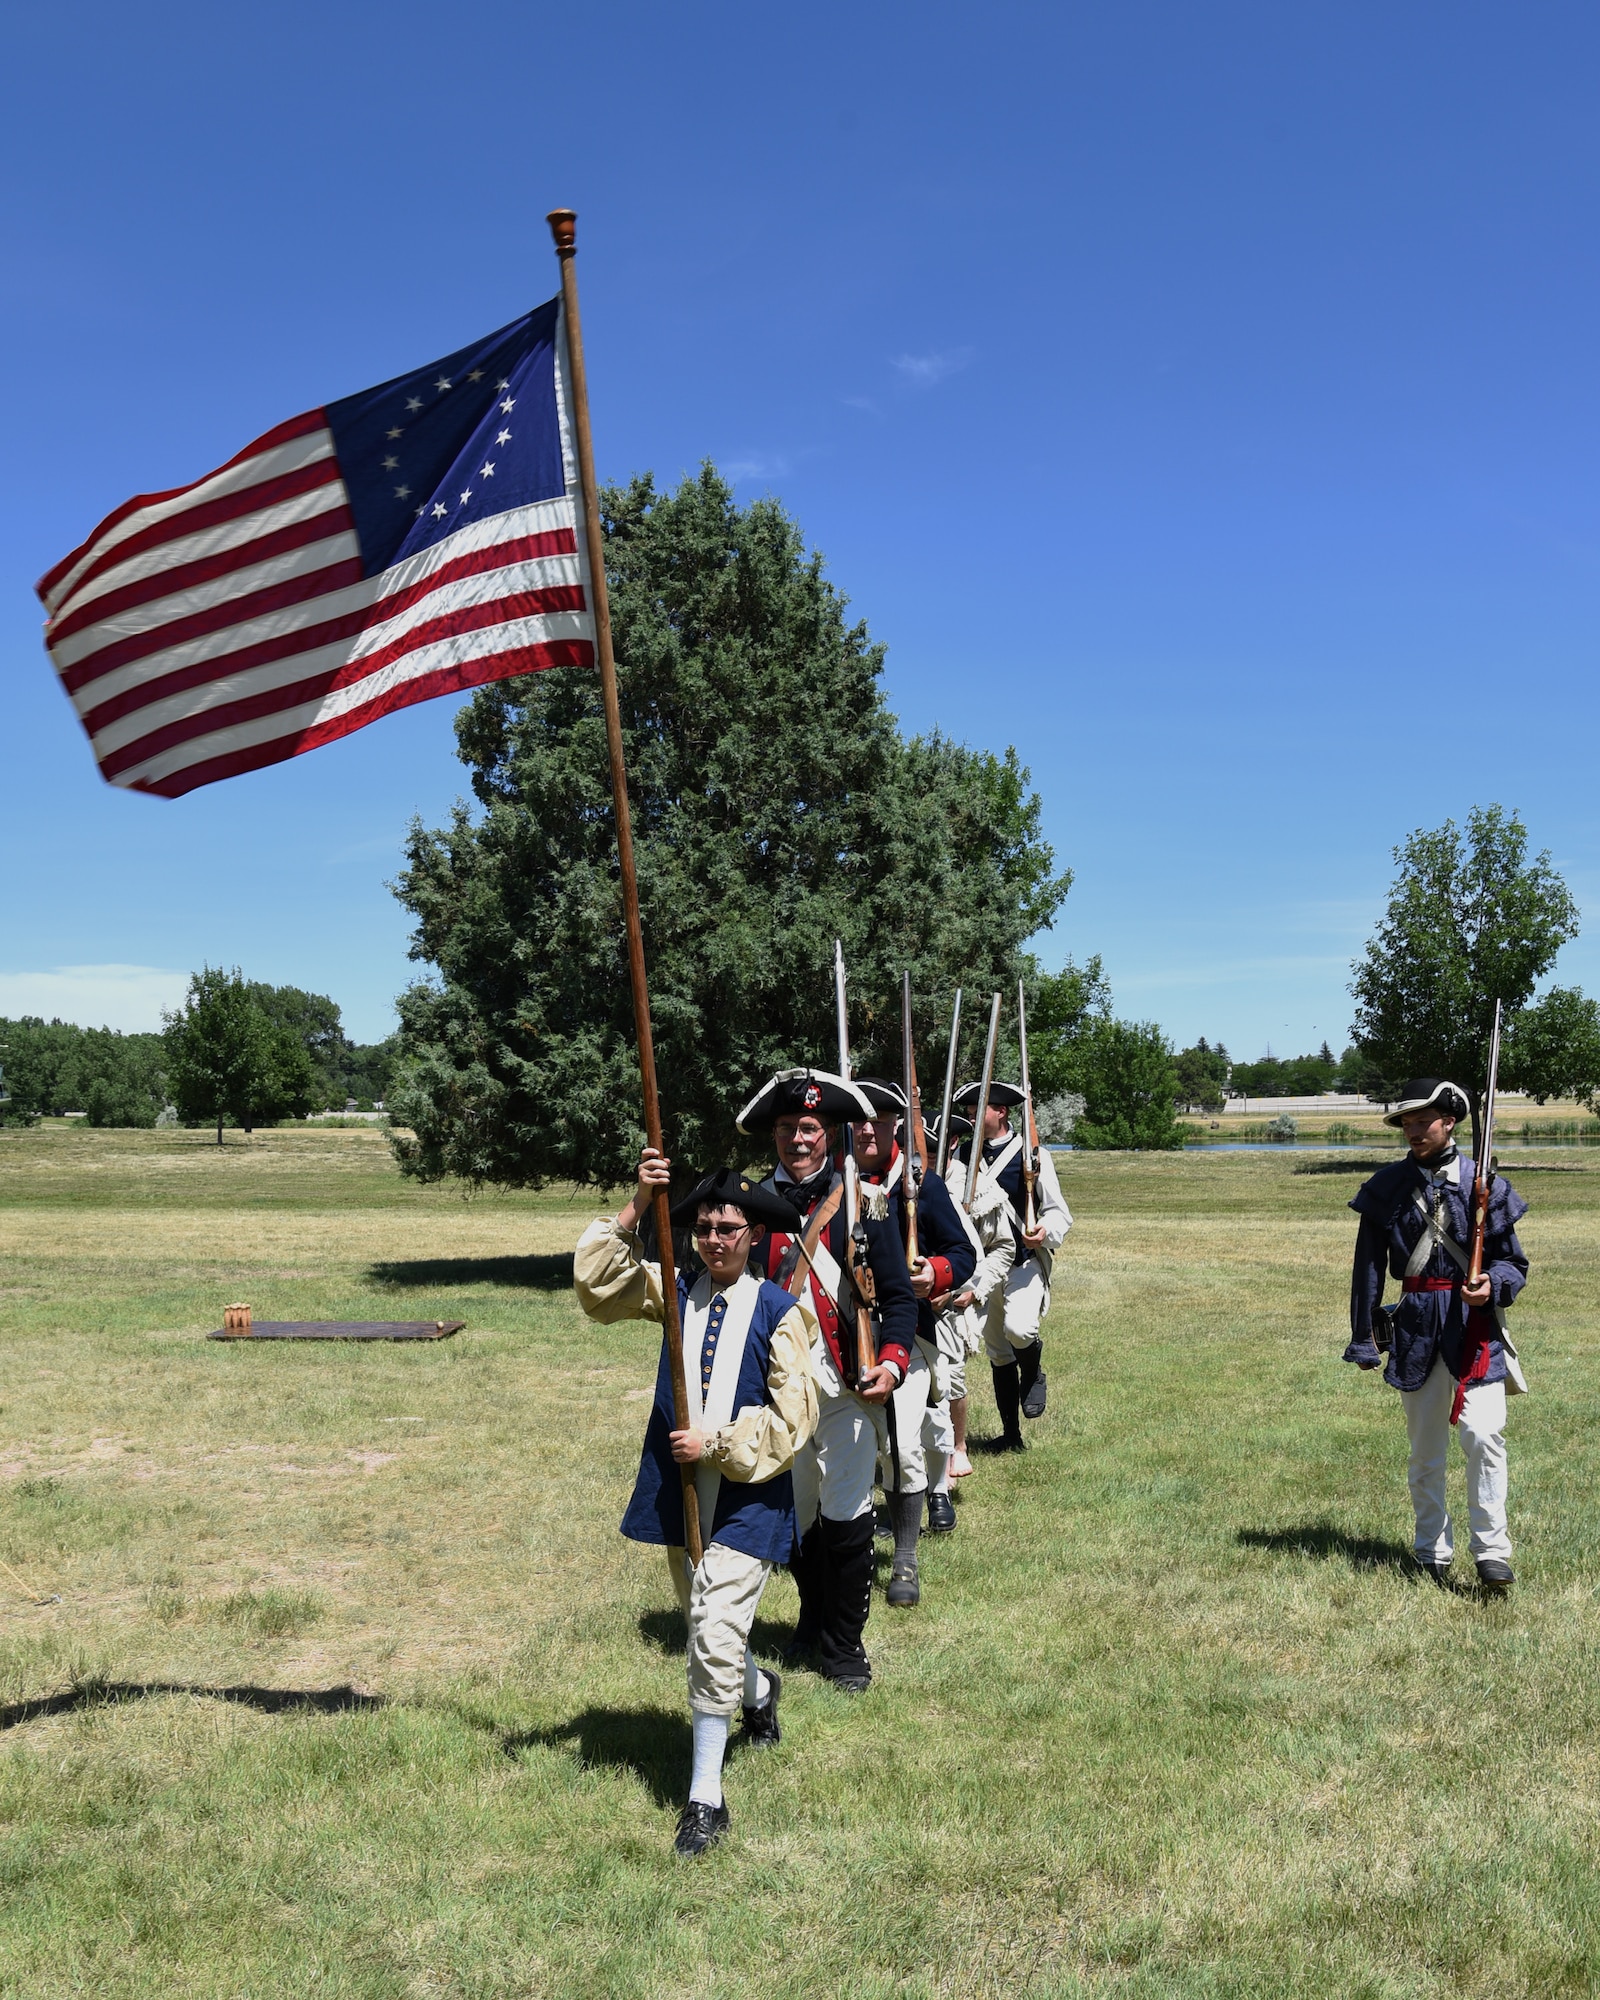 Revolutionary War reenactors march into position for a demonstration at F.E. Warren Air Force Base, Wyo., July 20, 2019 as part of the annual Fort D.A. Russell Days. D. A. Russell Days allows the base to showcase the current mission while also giving visitors a realistic glimpse of the base’s history. This year marks the 25th iteration of the event. (U.S. Air Force photo by Glenn S. Robertson)